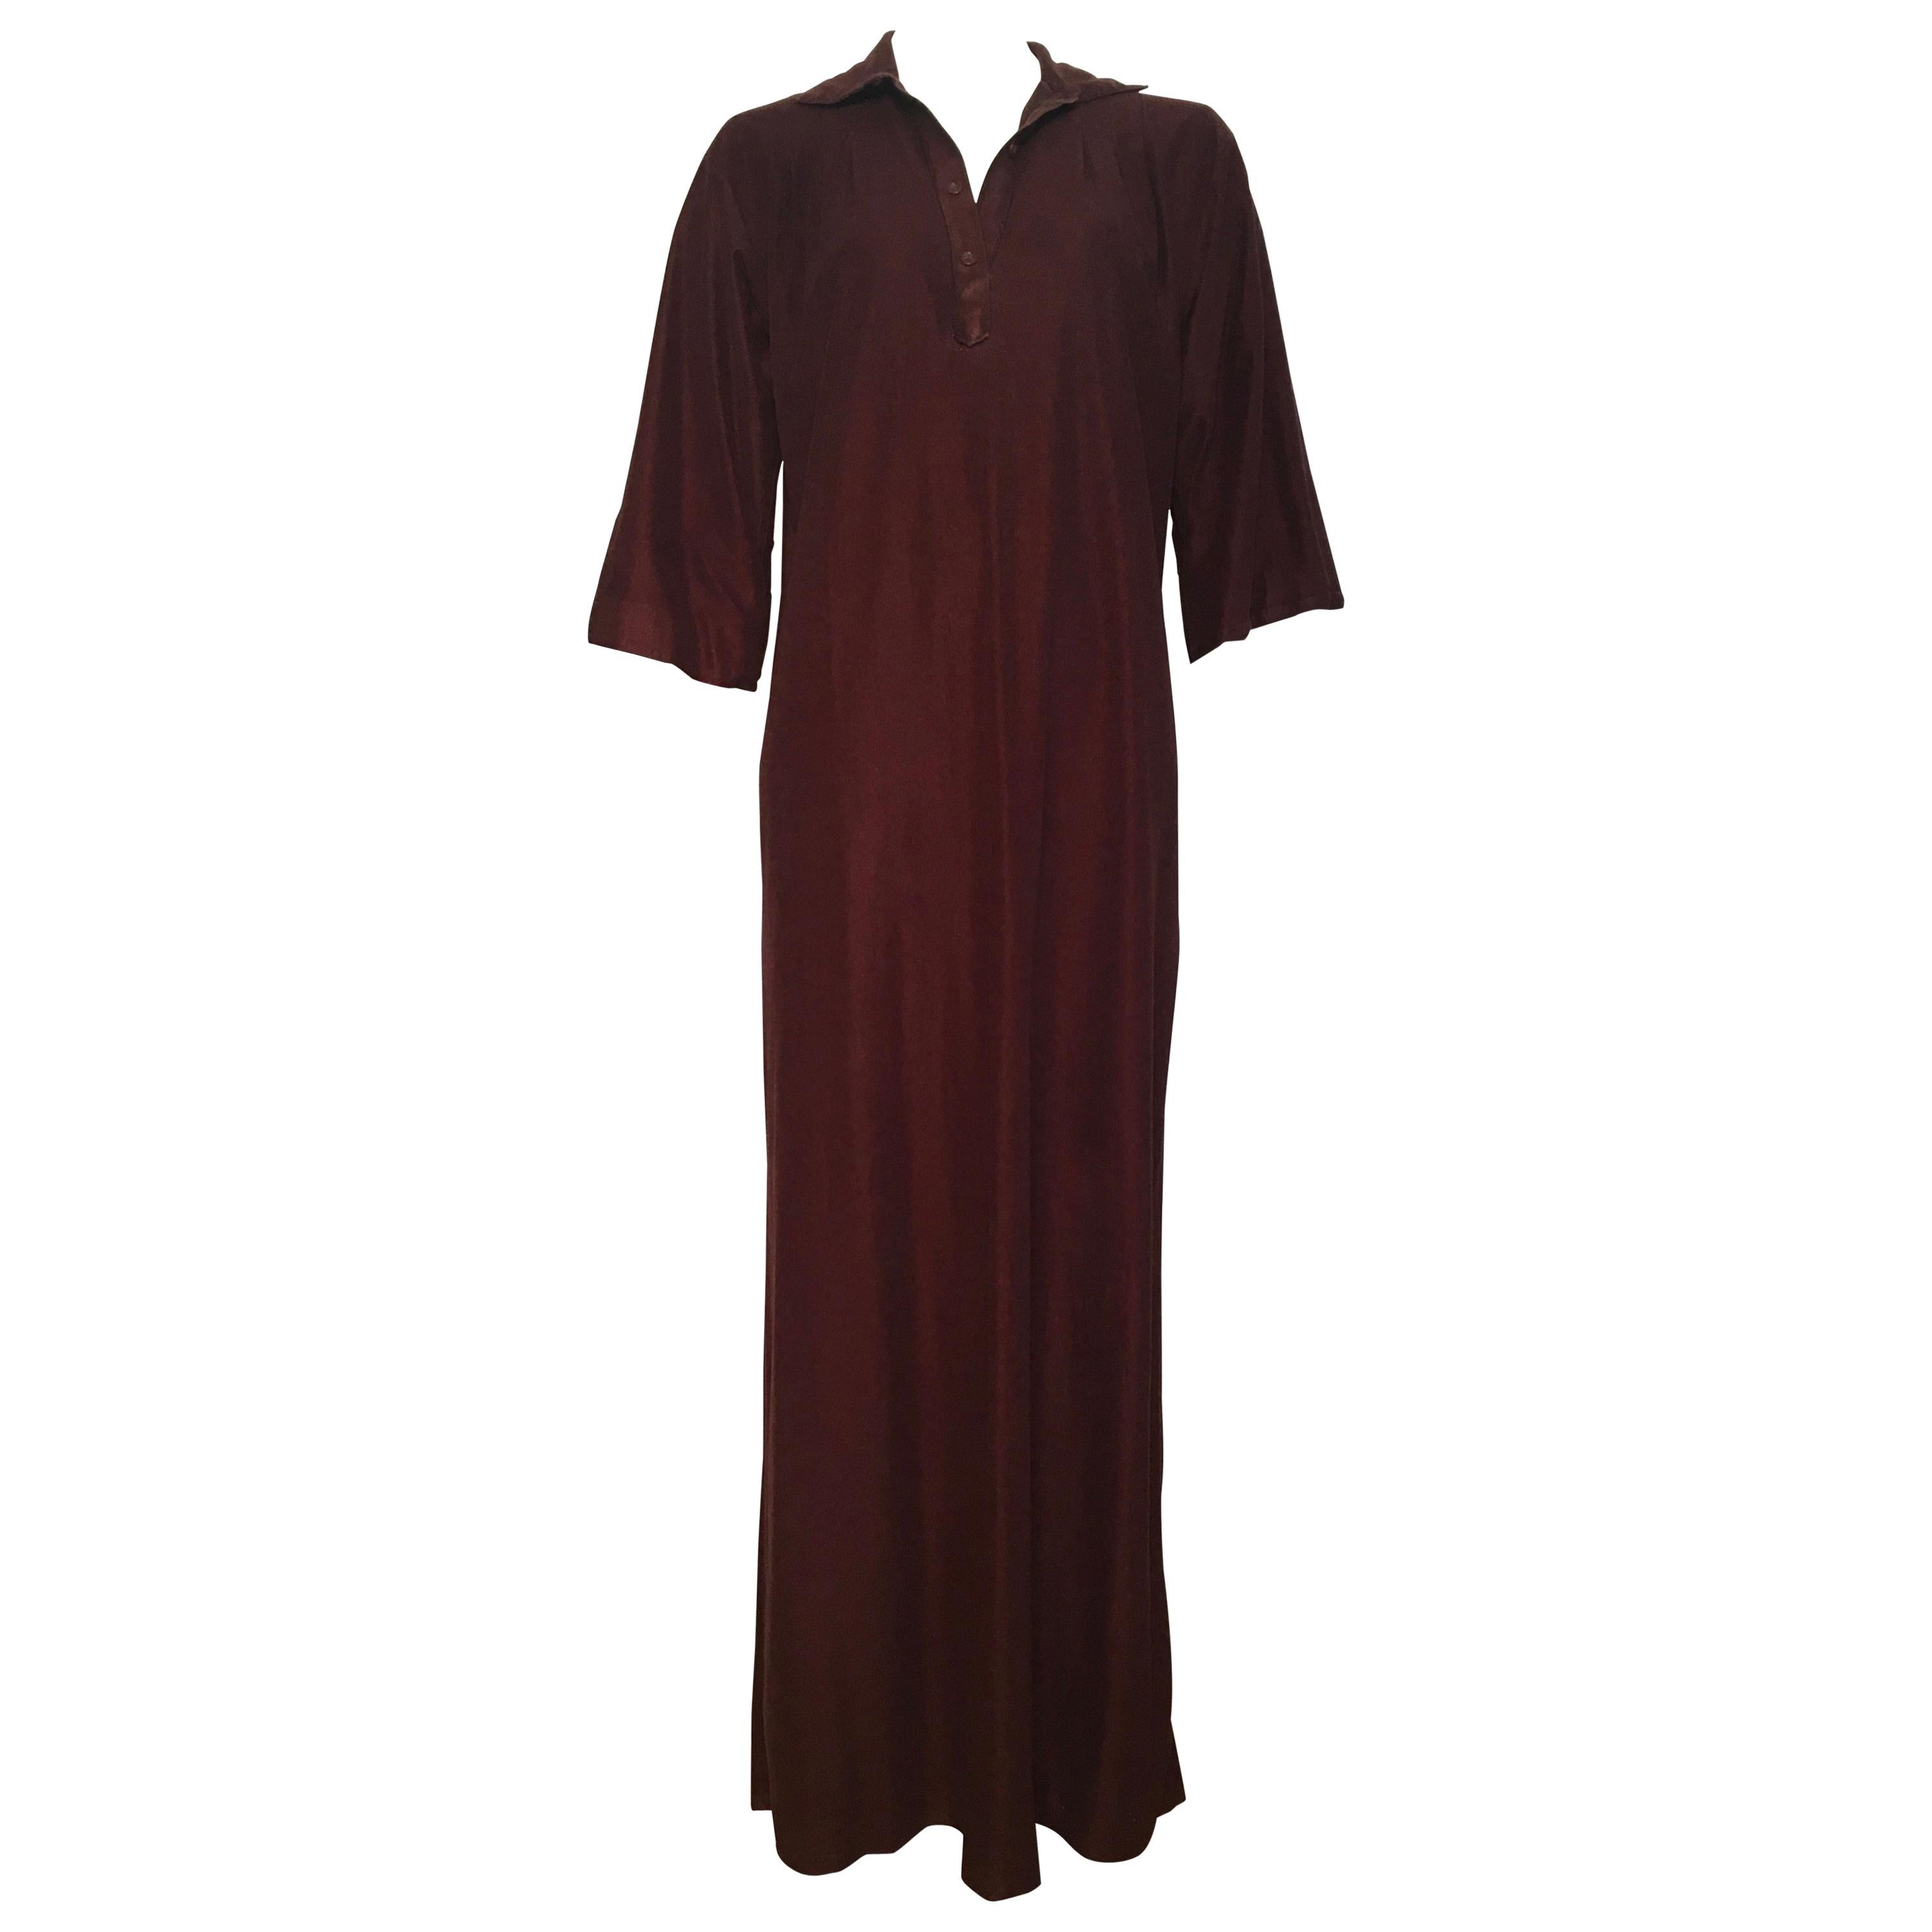 Geoffrey Beene for Swirl 1978 Brown Maxi / Loungewear with Pockets Size 6 / 8. For Sale